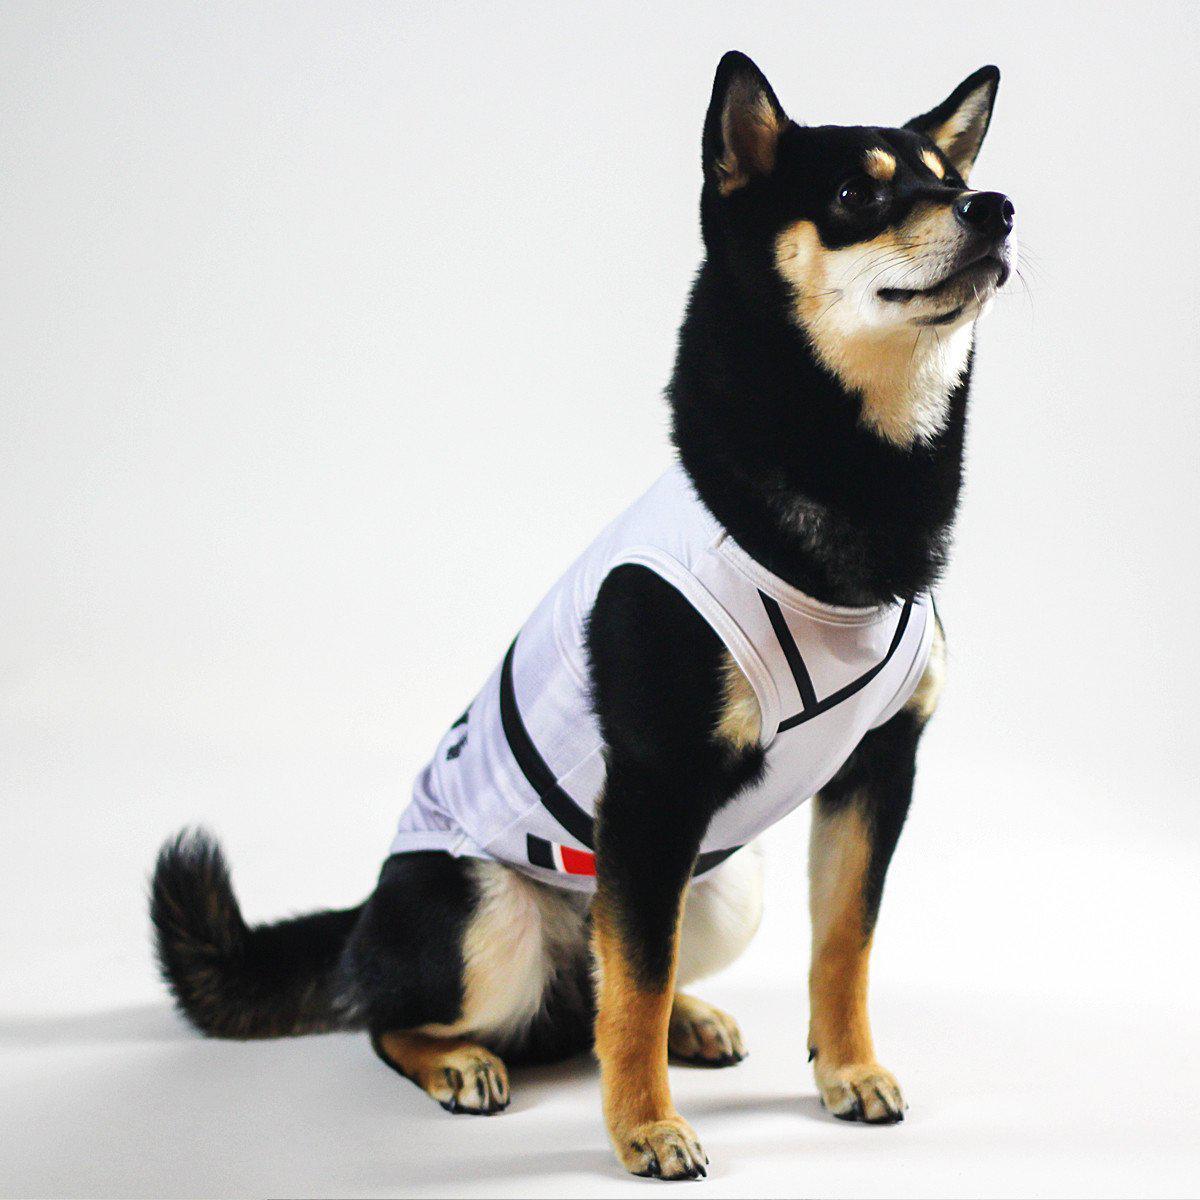 Clothes for Dogs Basketball Bomber Dog Hoodie Jacket